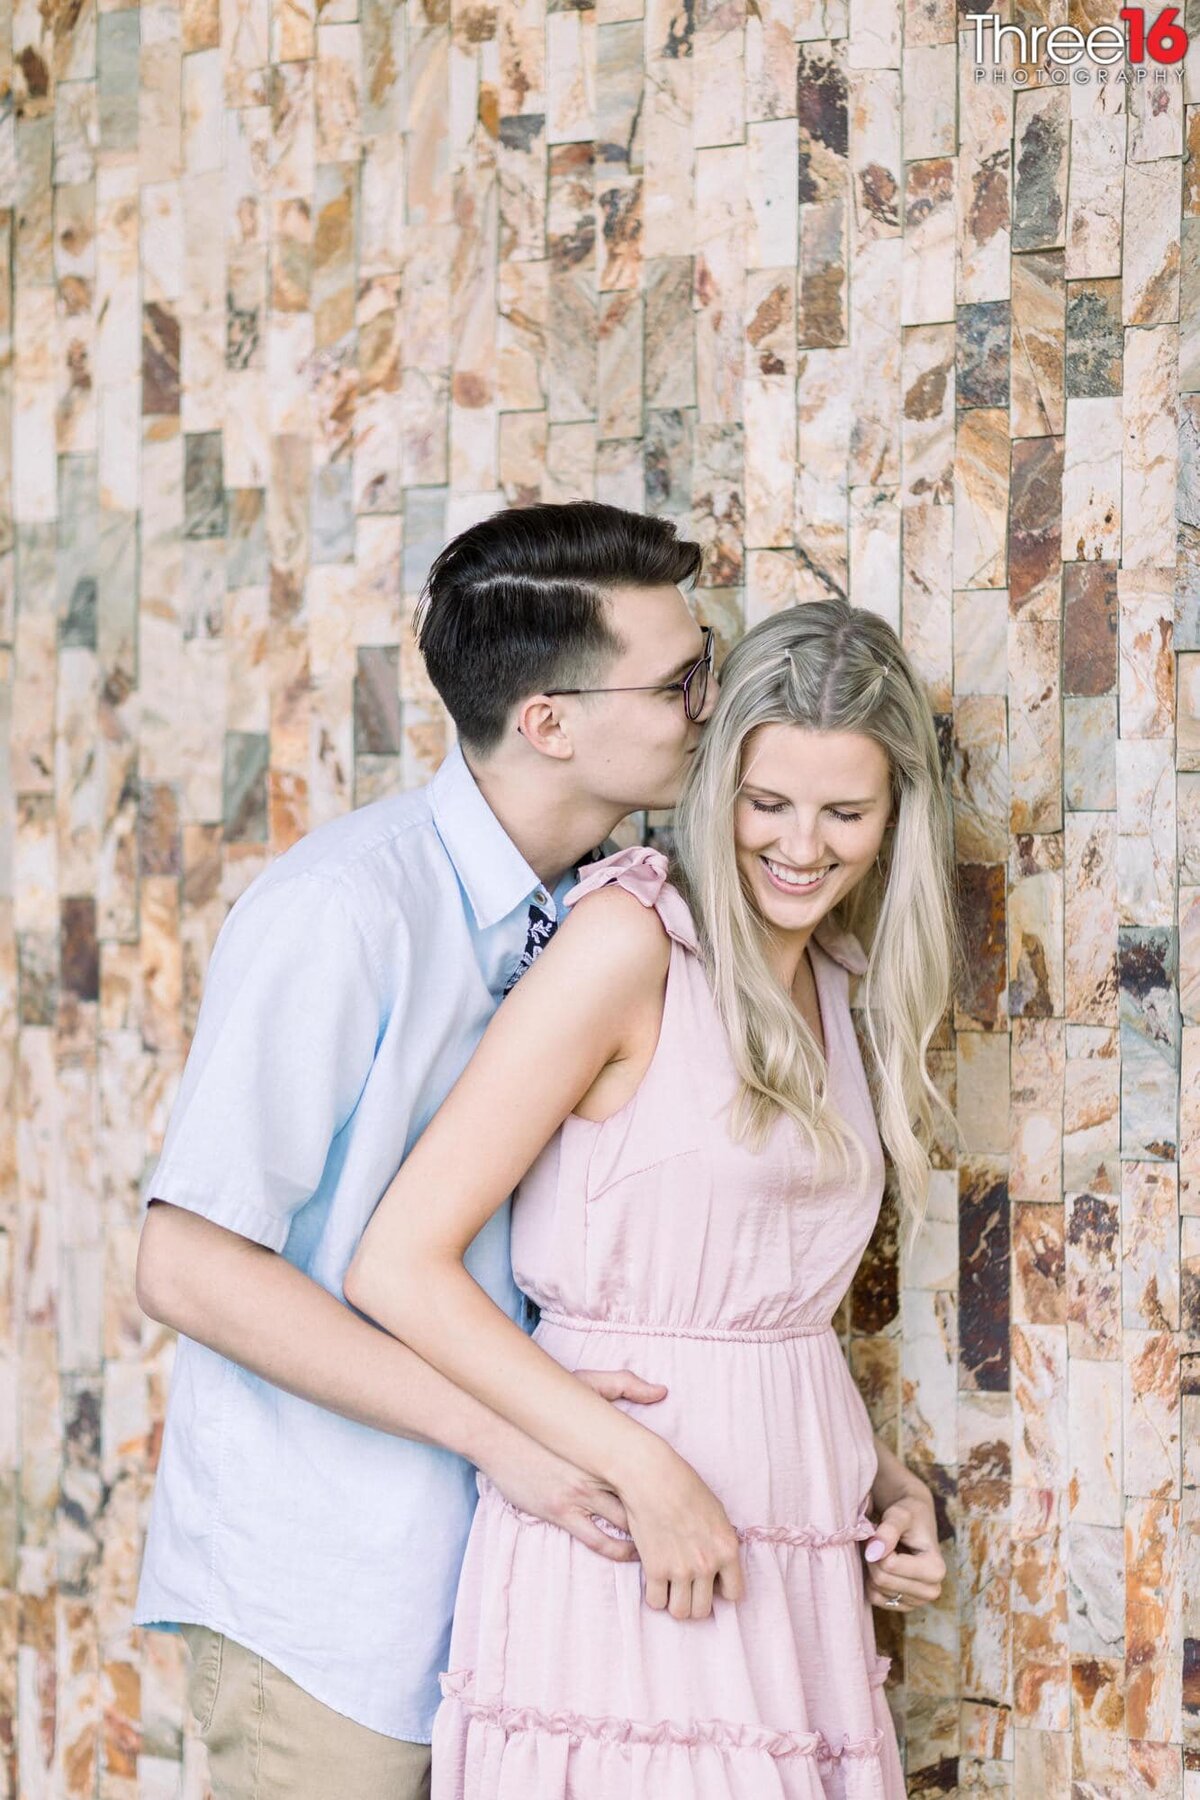 Groom to be whispers in his Bride's ear causing her to laugh